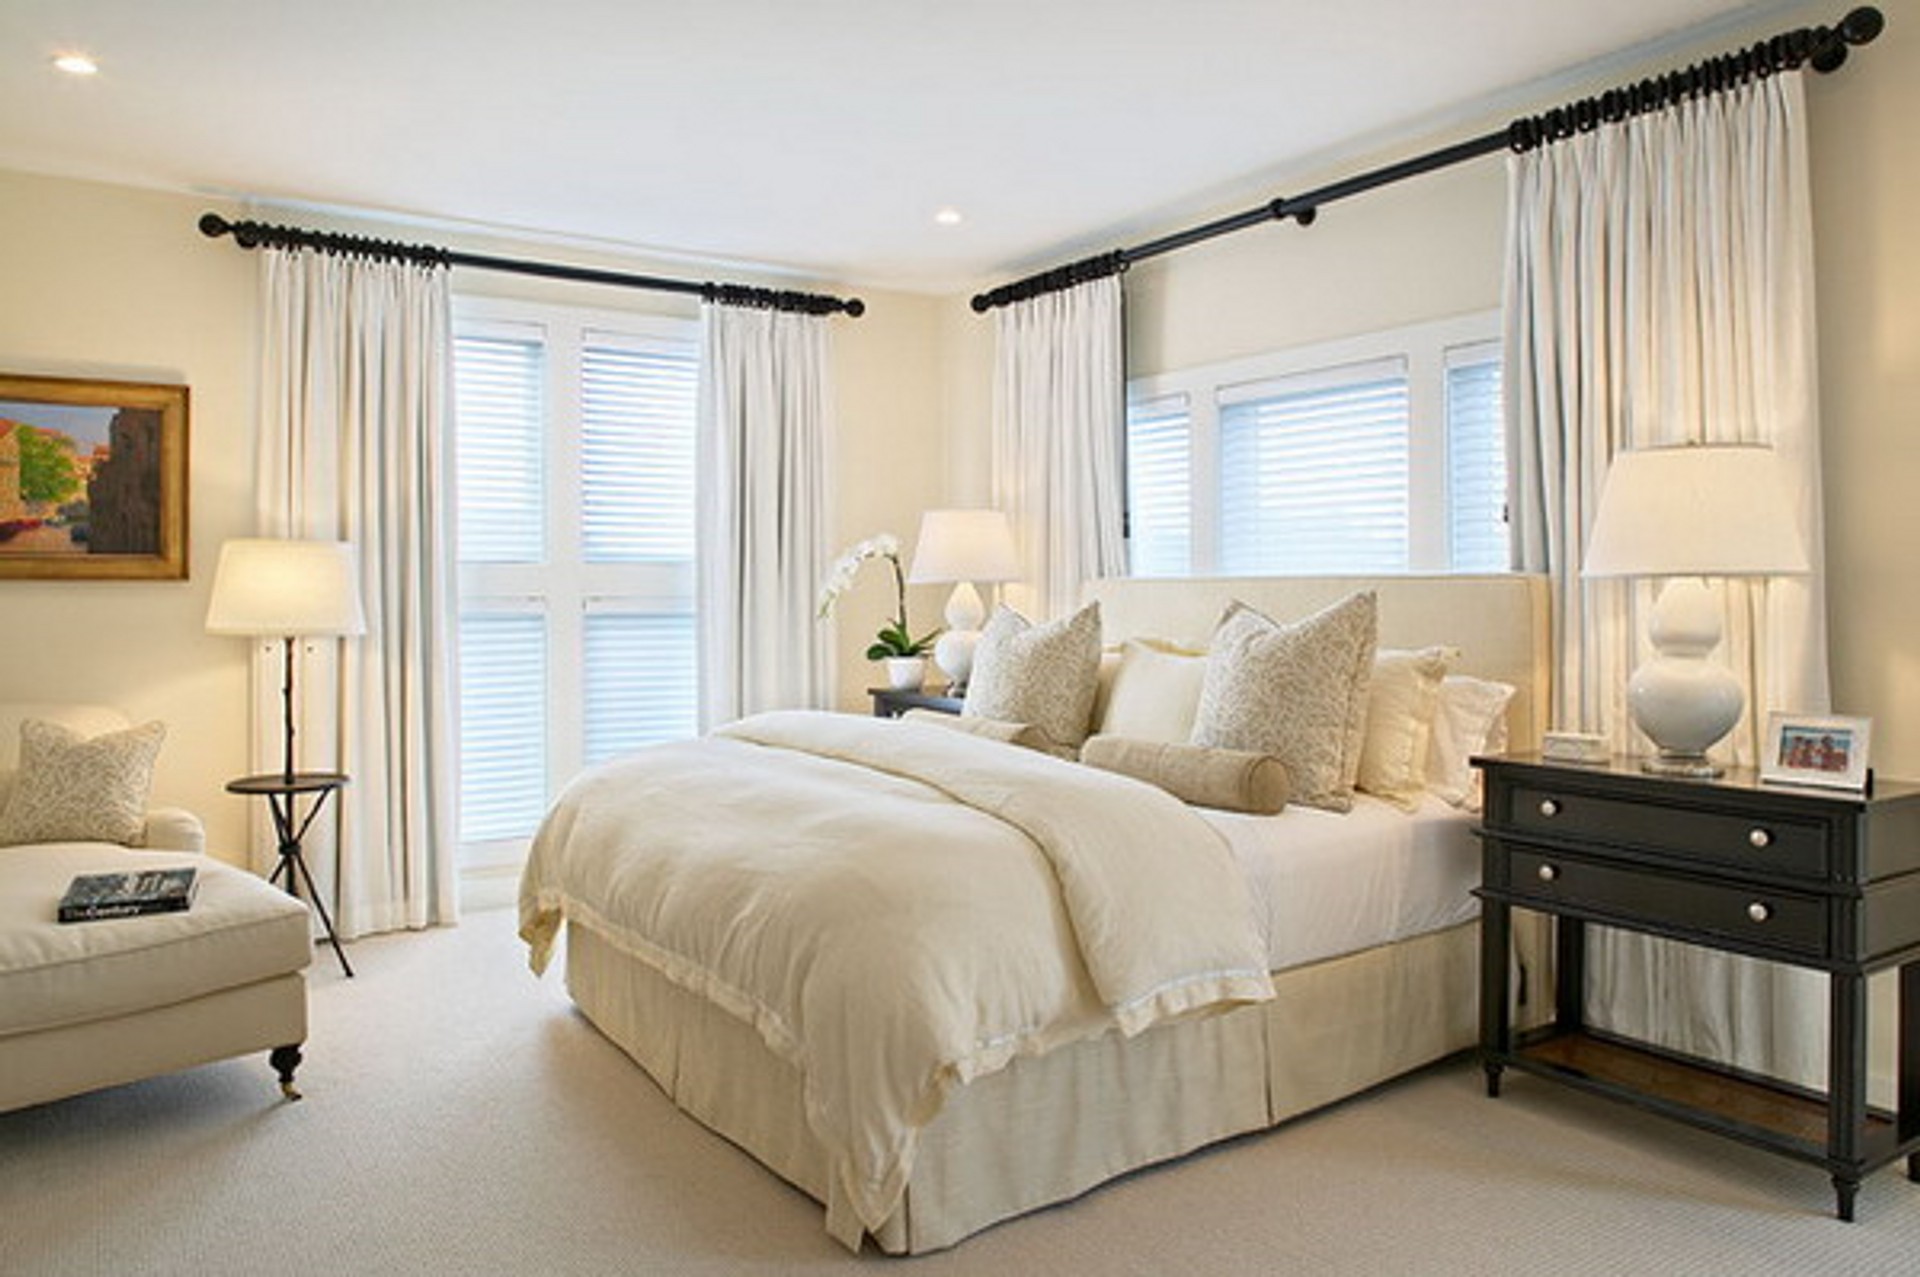 Window treatment pictures ideas